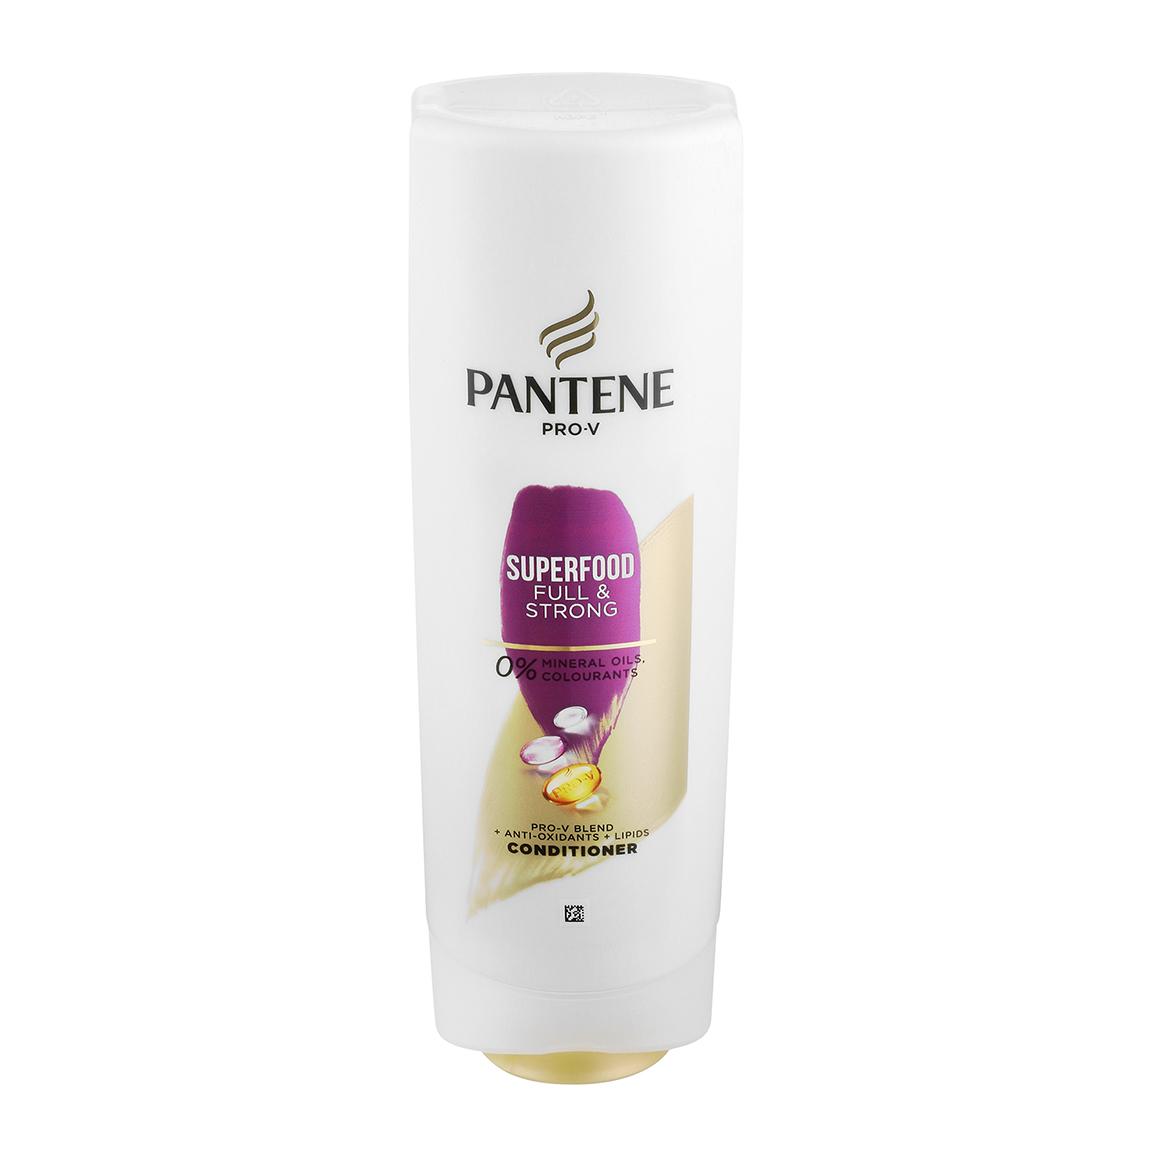 Pantene PRO -V Superfood Full and Strong Hair Conditioner 360ML